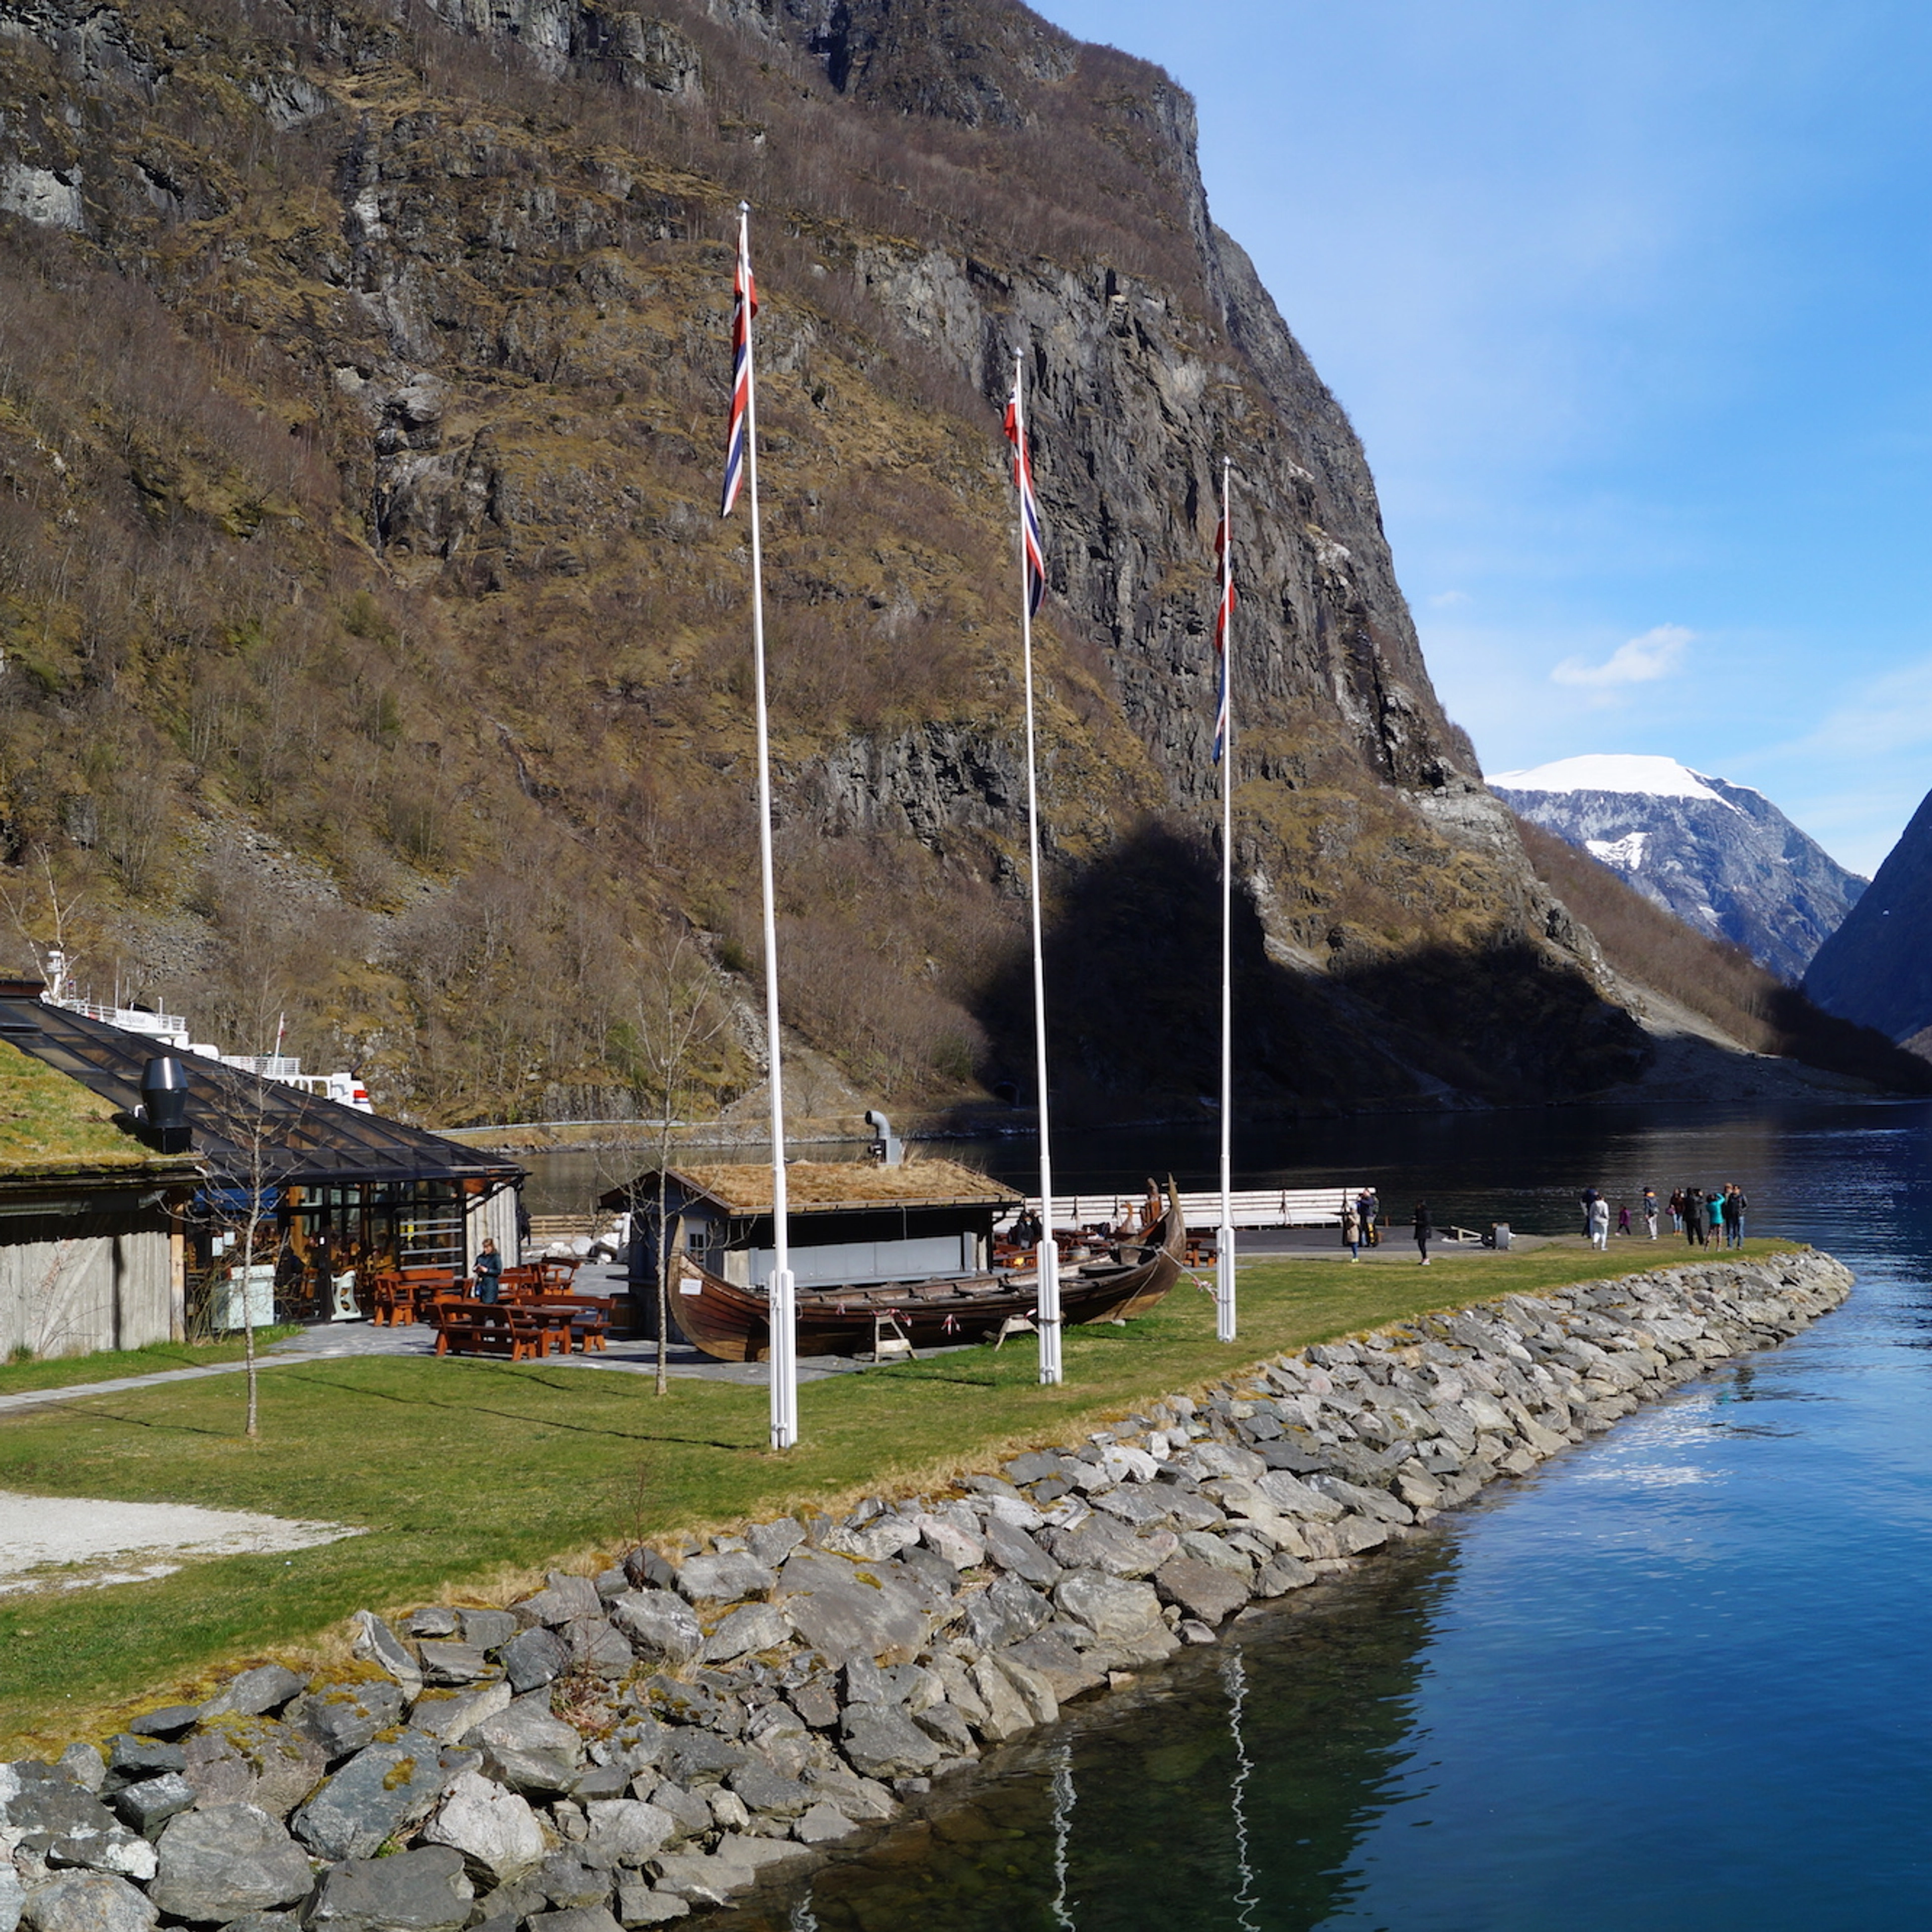 Experience Flåmsbana on the famous Norway in a nutshell® tour by Fjord Tours